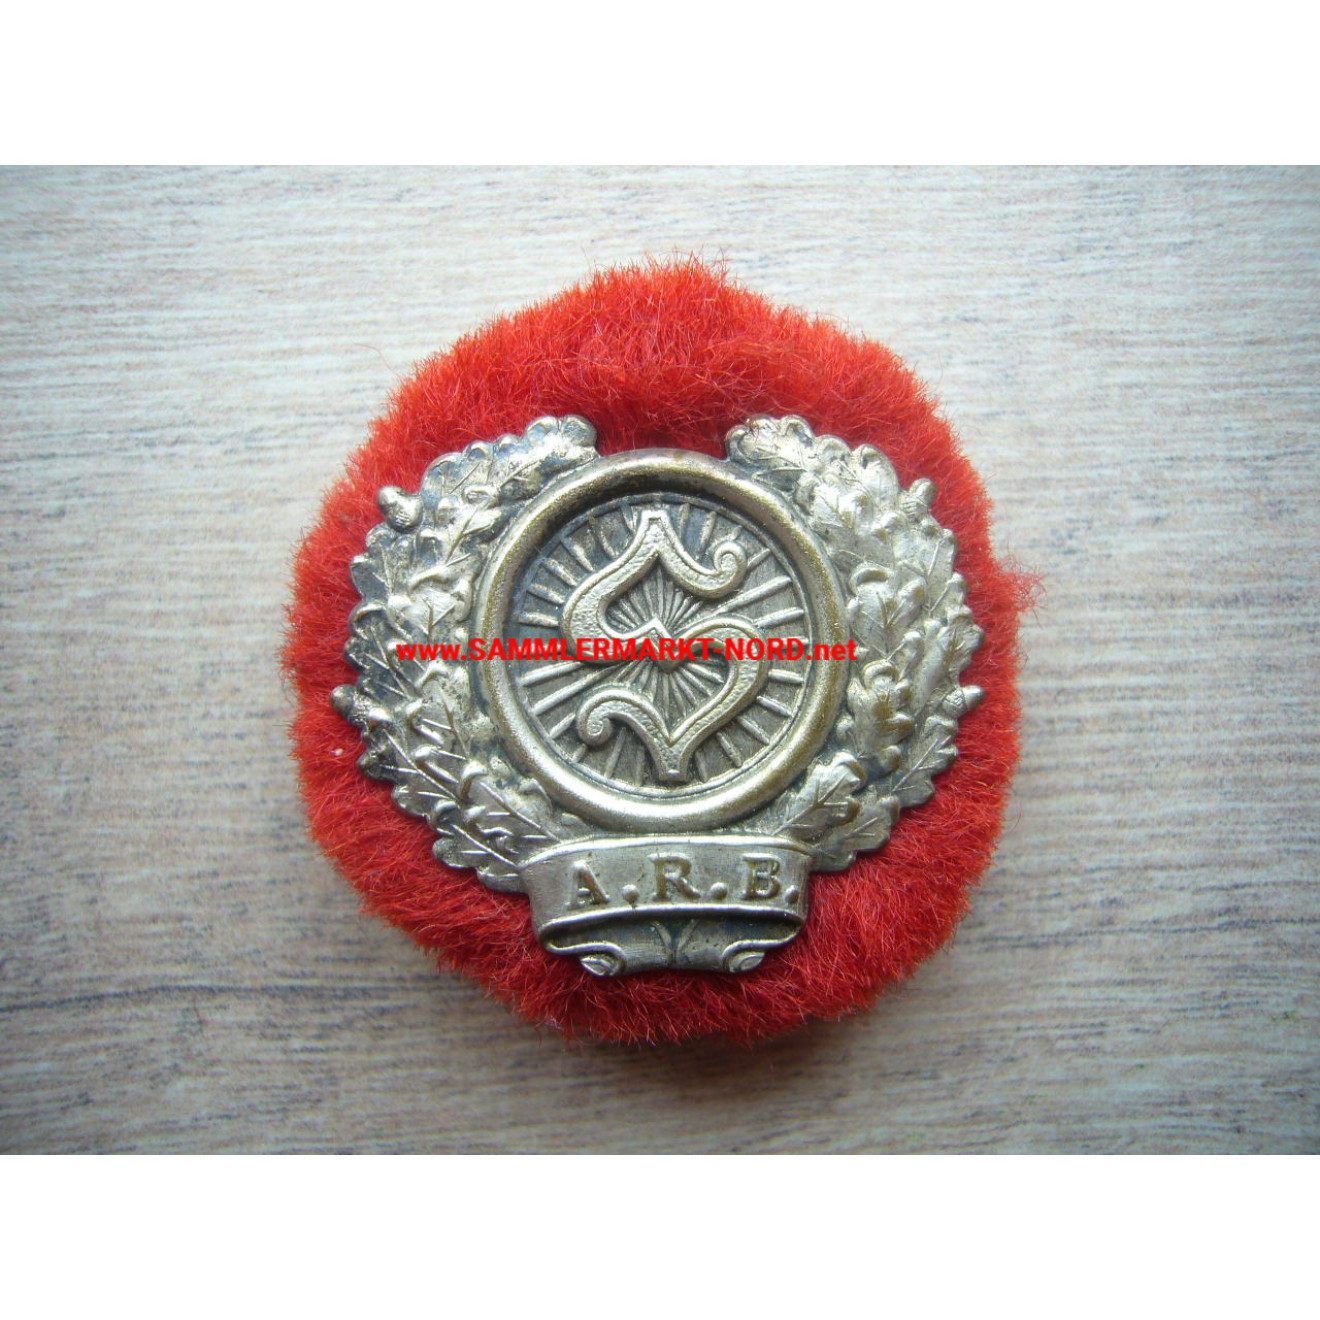 Workers' Cyclists' Union "Solidarity" (ARB) - Membership Badge 1. version